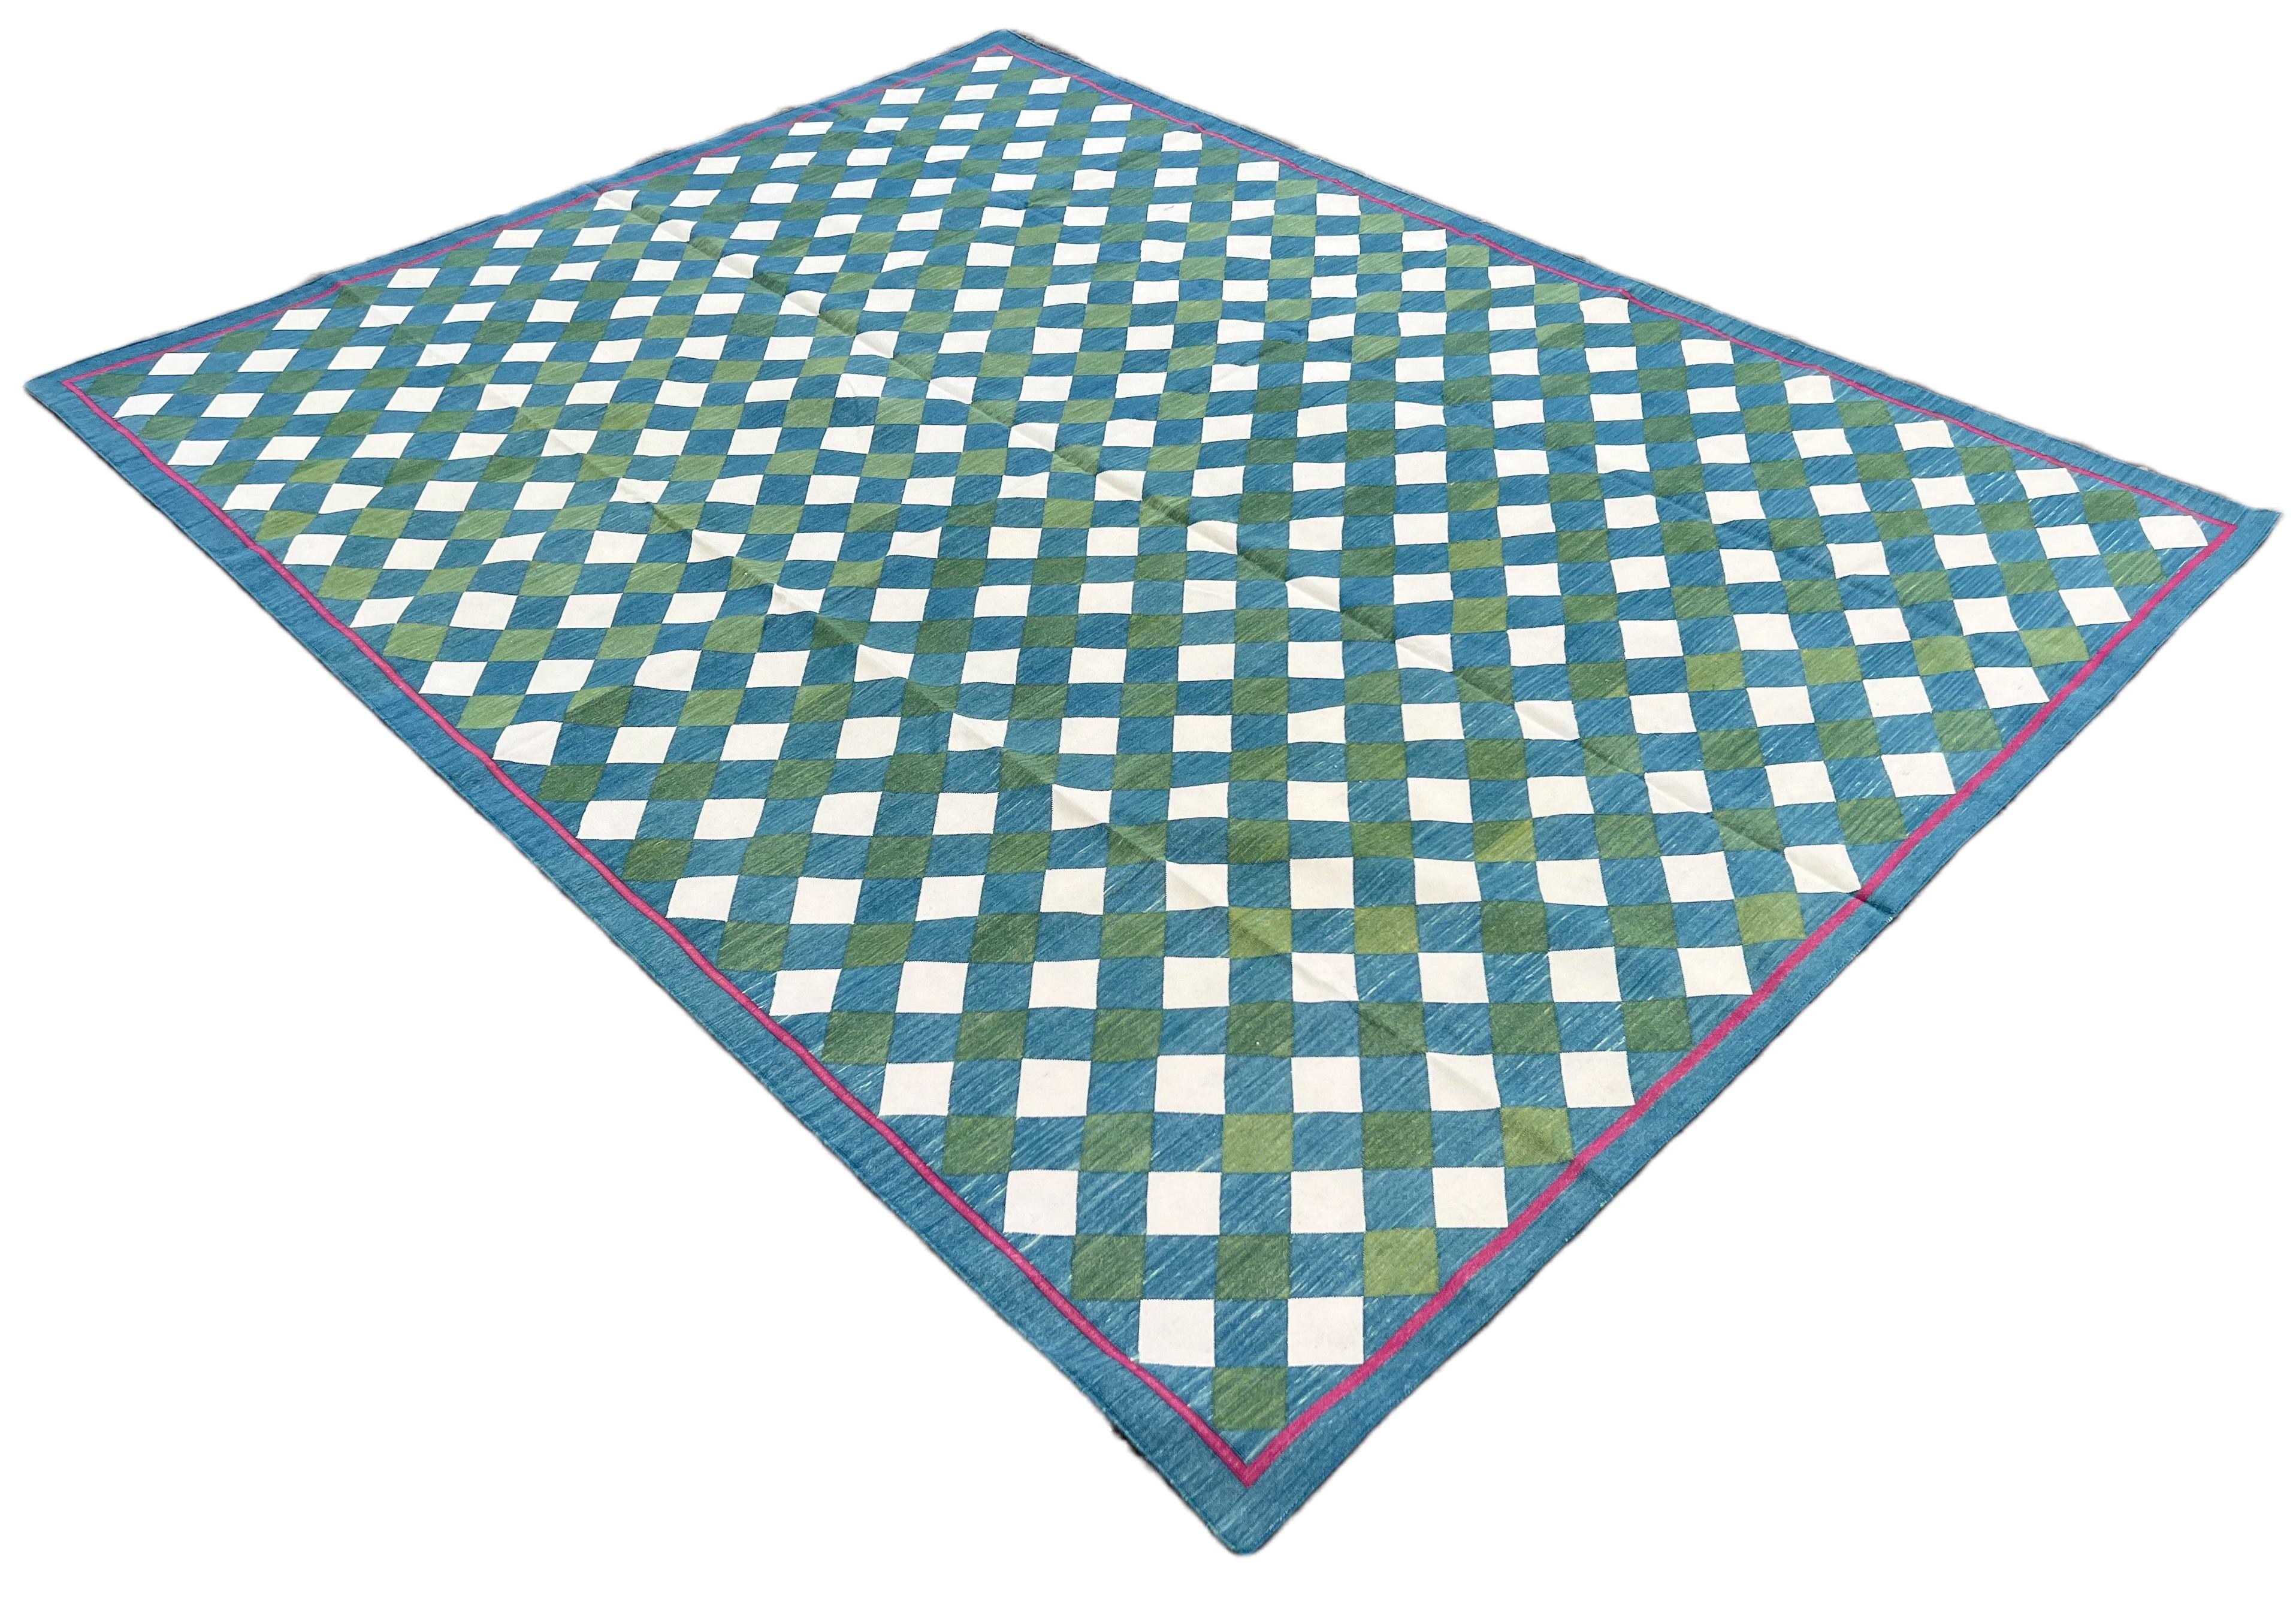 Cotton Vegetable Dyed Area Rug, Teal Blue, Cream And Green Checked Indian Rug-6'x9'
These special flat-weave dhurries are hand-woven with 15 ply 100% cotton yarn. Due to the special manufacturing techniques used to create our rugs, the size and